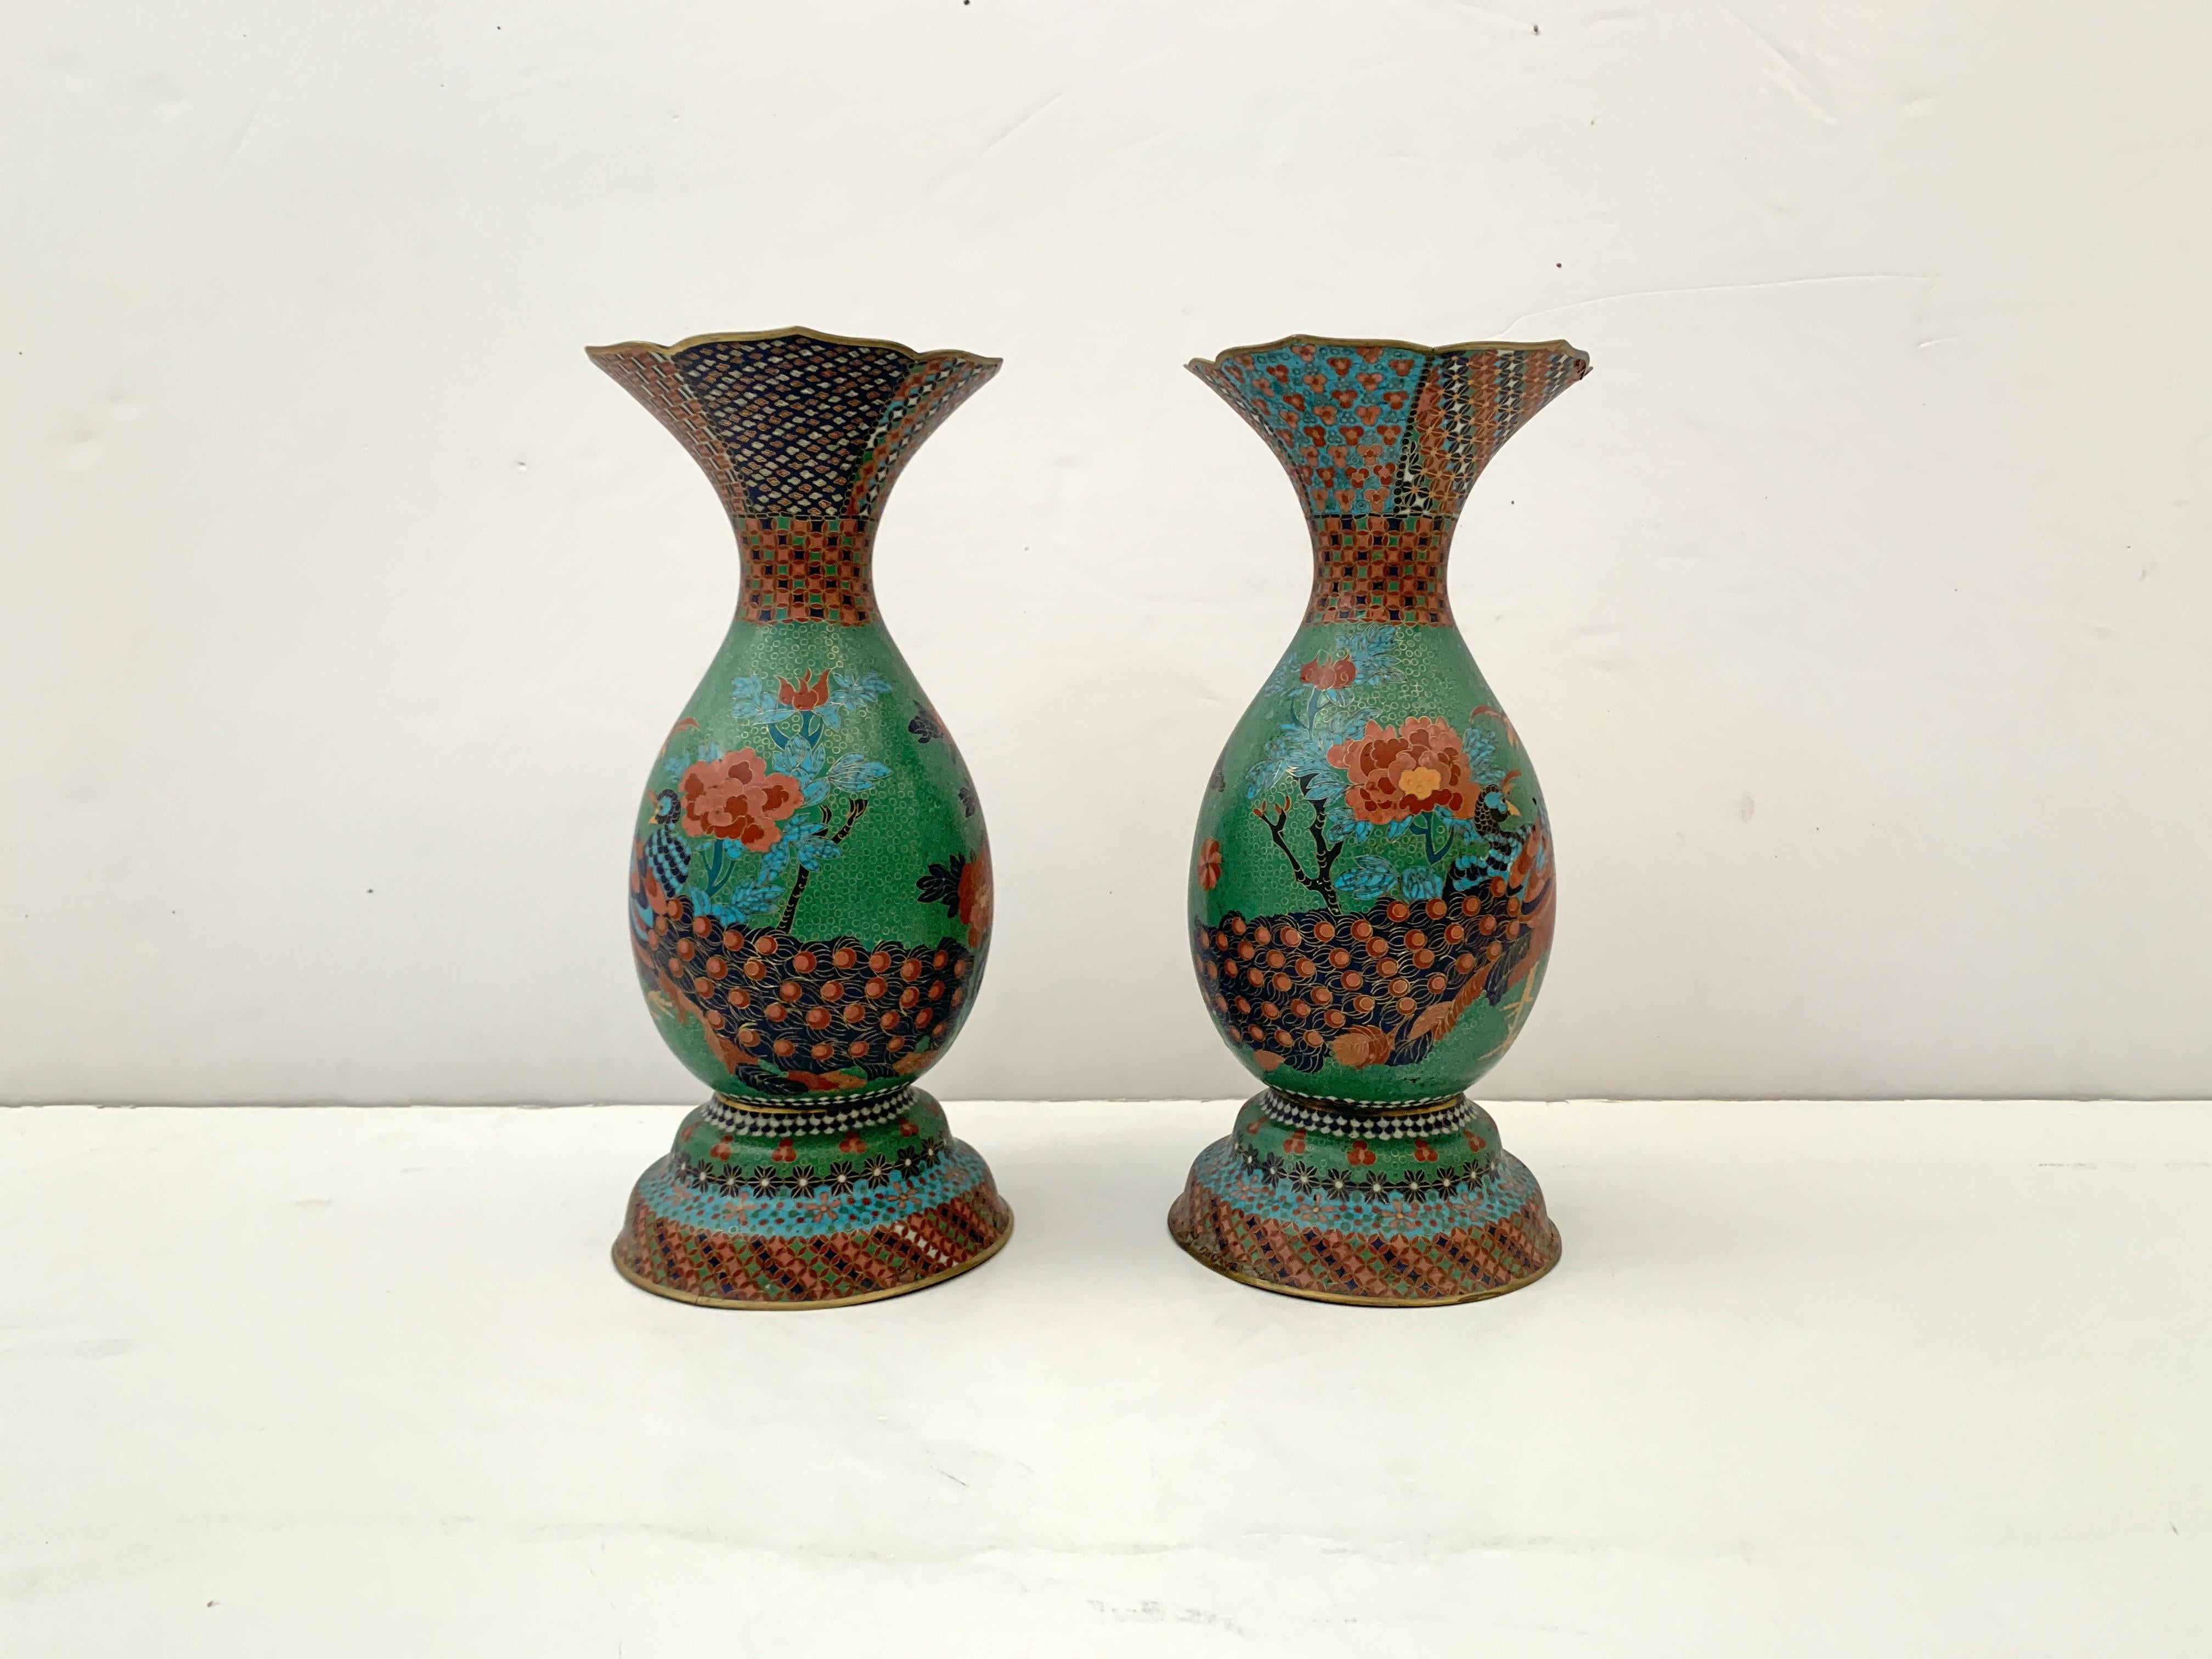 An impressive pair of Japanese cloisonné peacock vases attributed to Kaji Tsunekichi (1803 - 1883), Meiji period, mid-19th century, Japan. 

The vases of pear shape, with a high splayed foot and large everted trumpet mouth. The bodies with a